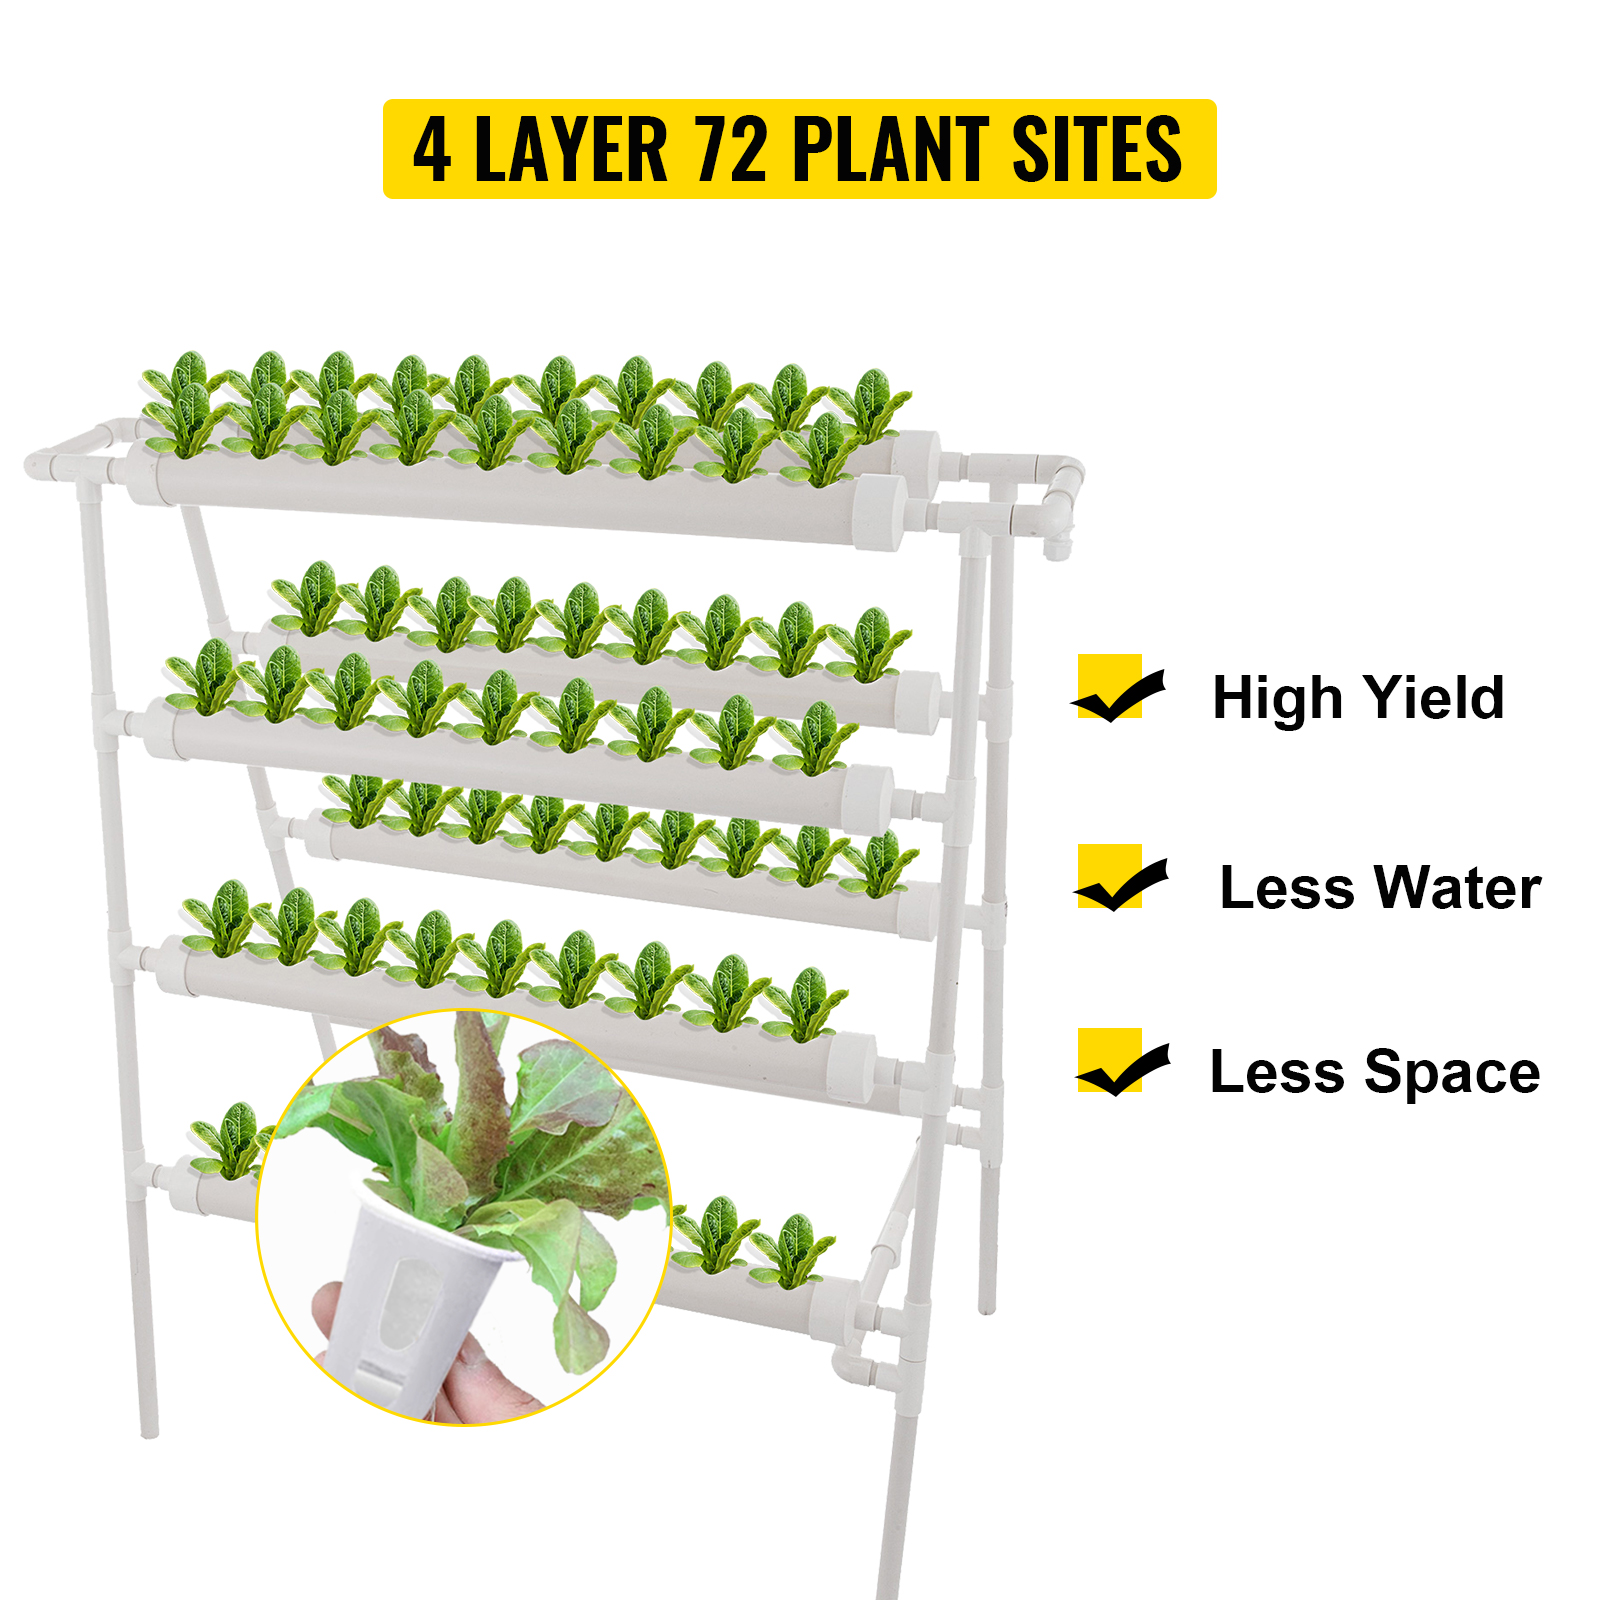 EBTOOLS Hydroponic Site Grow Kit,36 Holes Hydroponic Rack Plant System Grow Kit Water Culture Piping Site Plant Soilless Growing Systems for Home Balcony Garden 